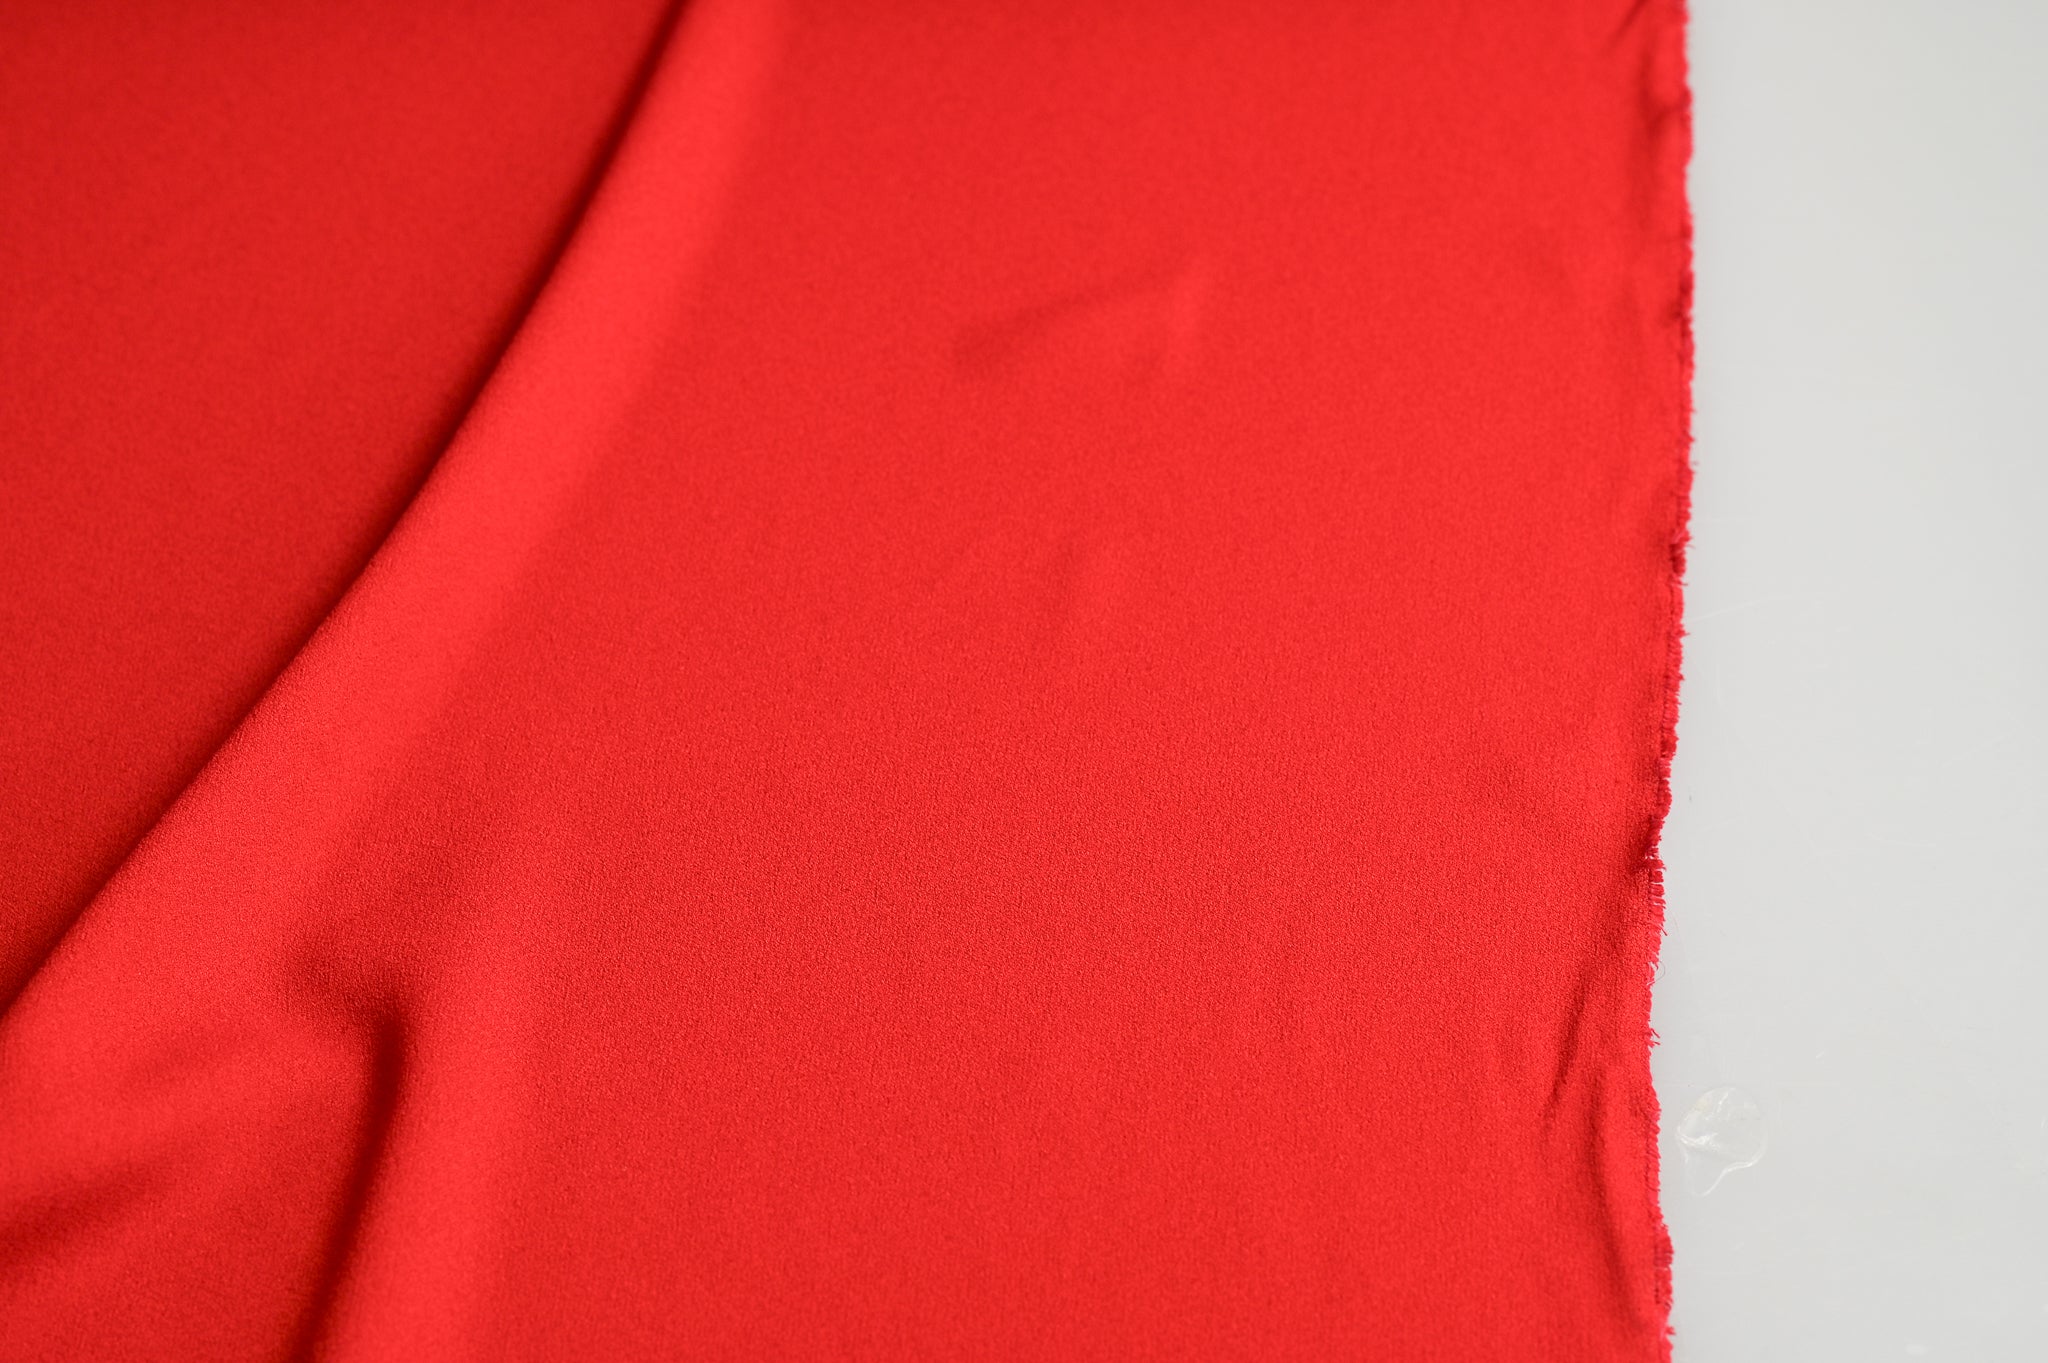 Red of My Heart - Silk Viscose Crepe